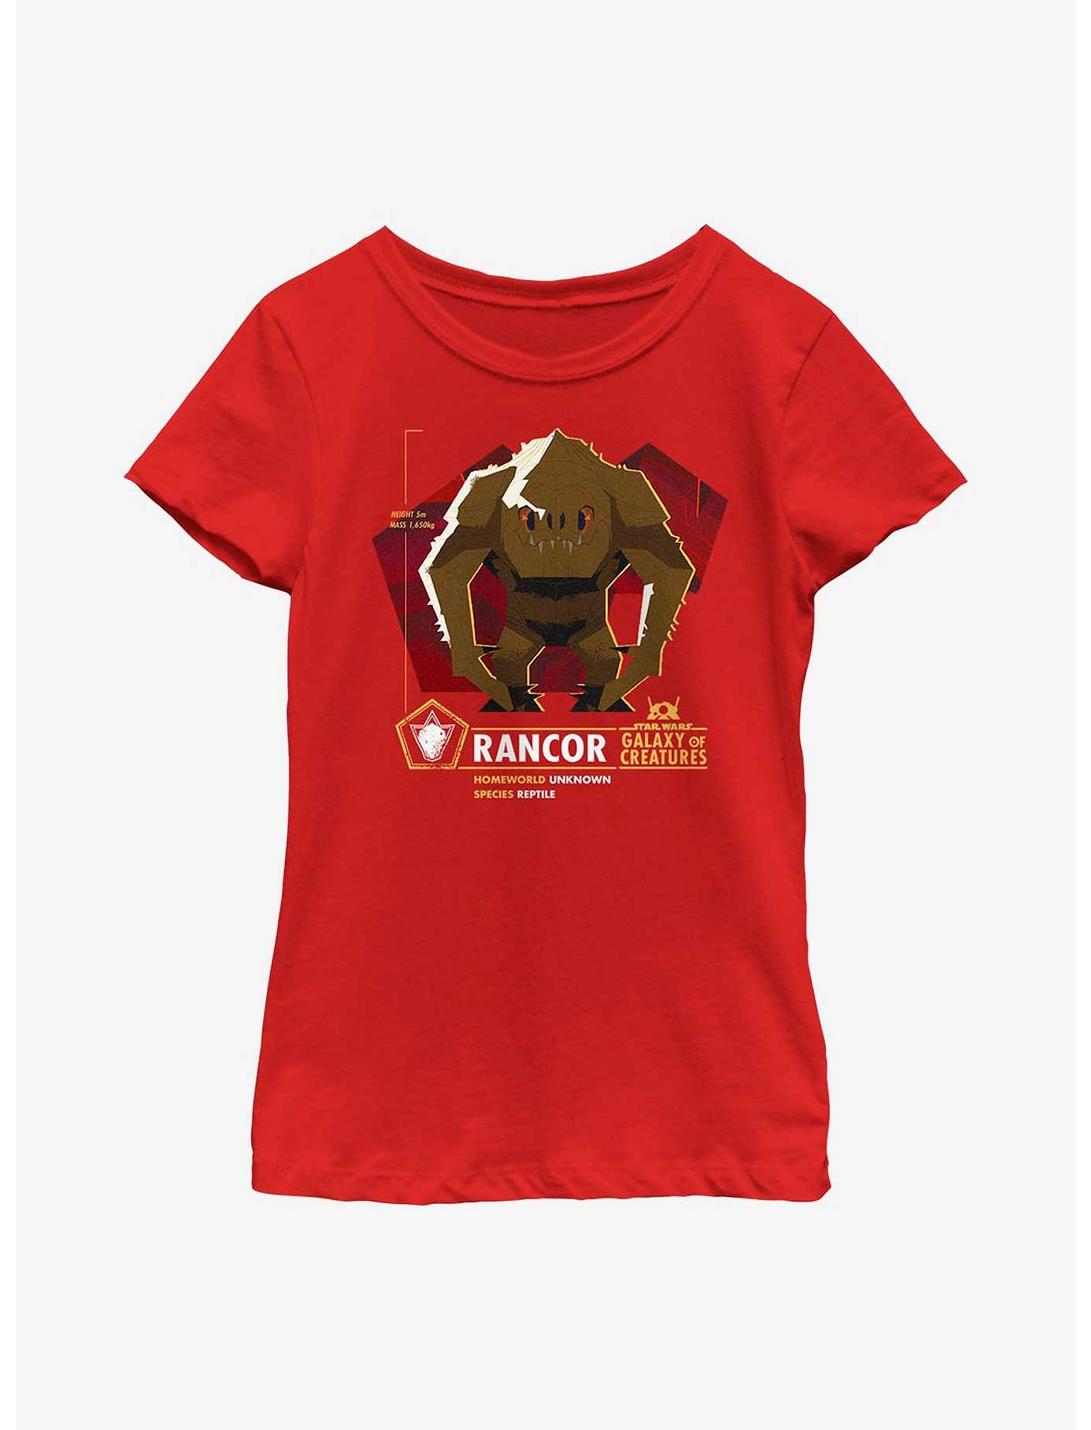 Star Wars Galaxy Of Creatures Rancor Species Youth Girls T-Shirt, RED, hi-res